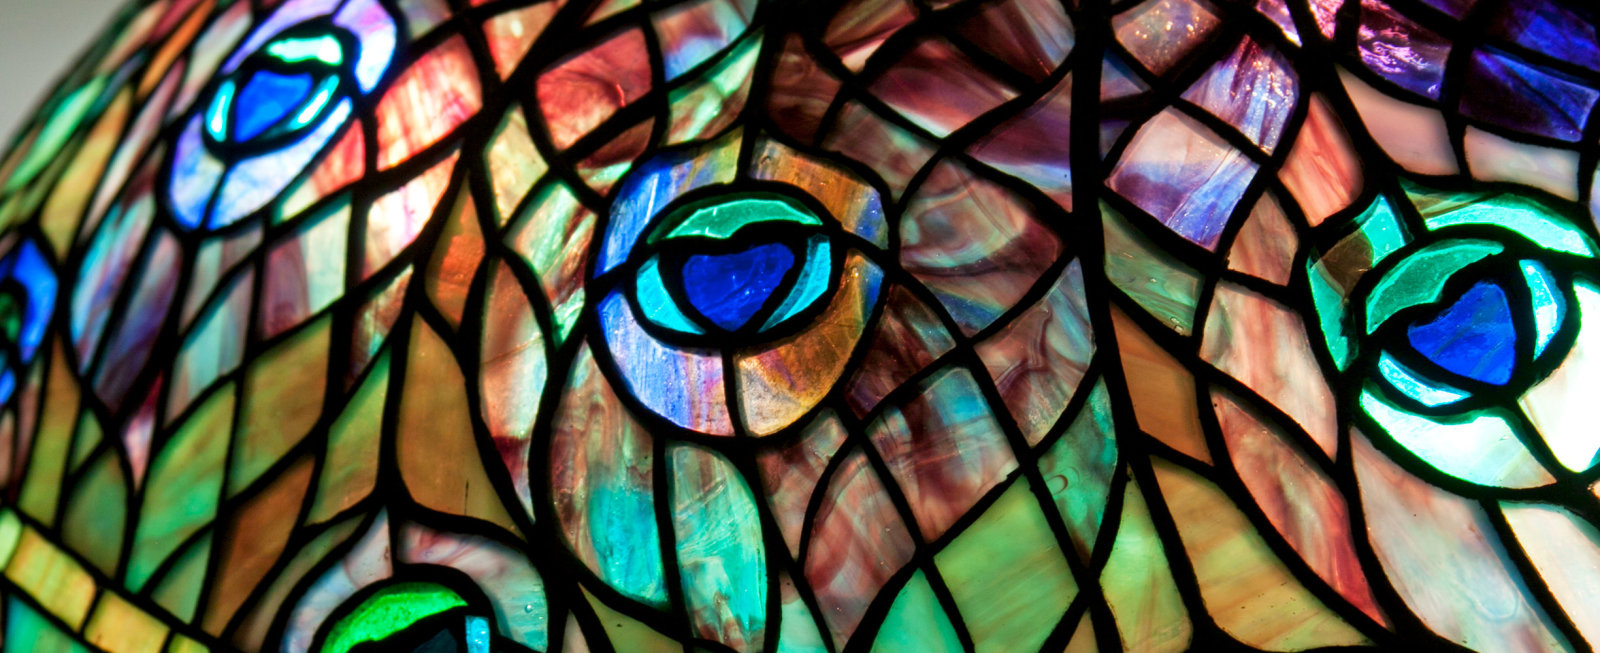 a leaded glass tiffany lamp, close up detail showing the striated coloration of the tiffany glass in shades of purple, teal, and golden amber, depicting the eyes of peacock feathers